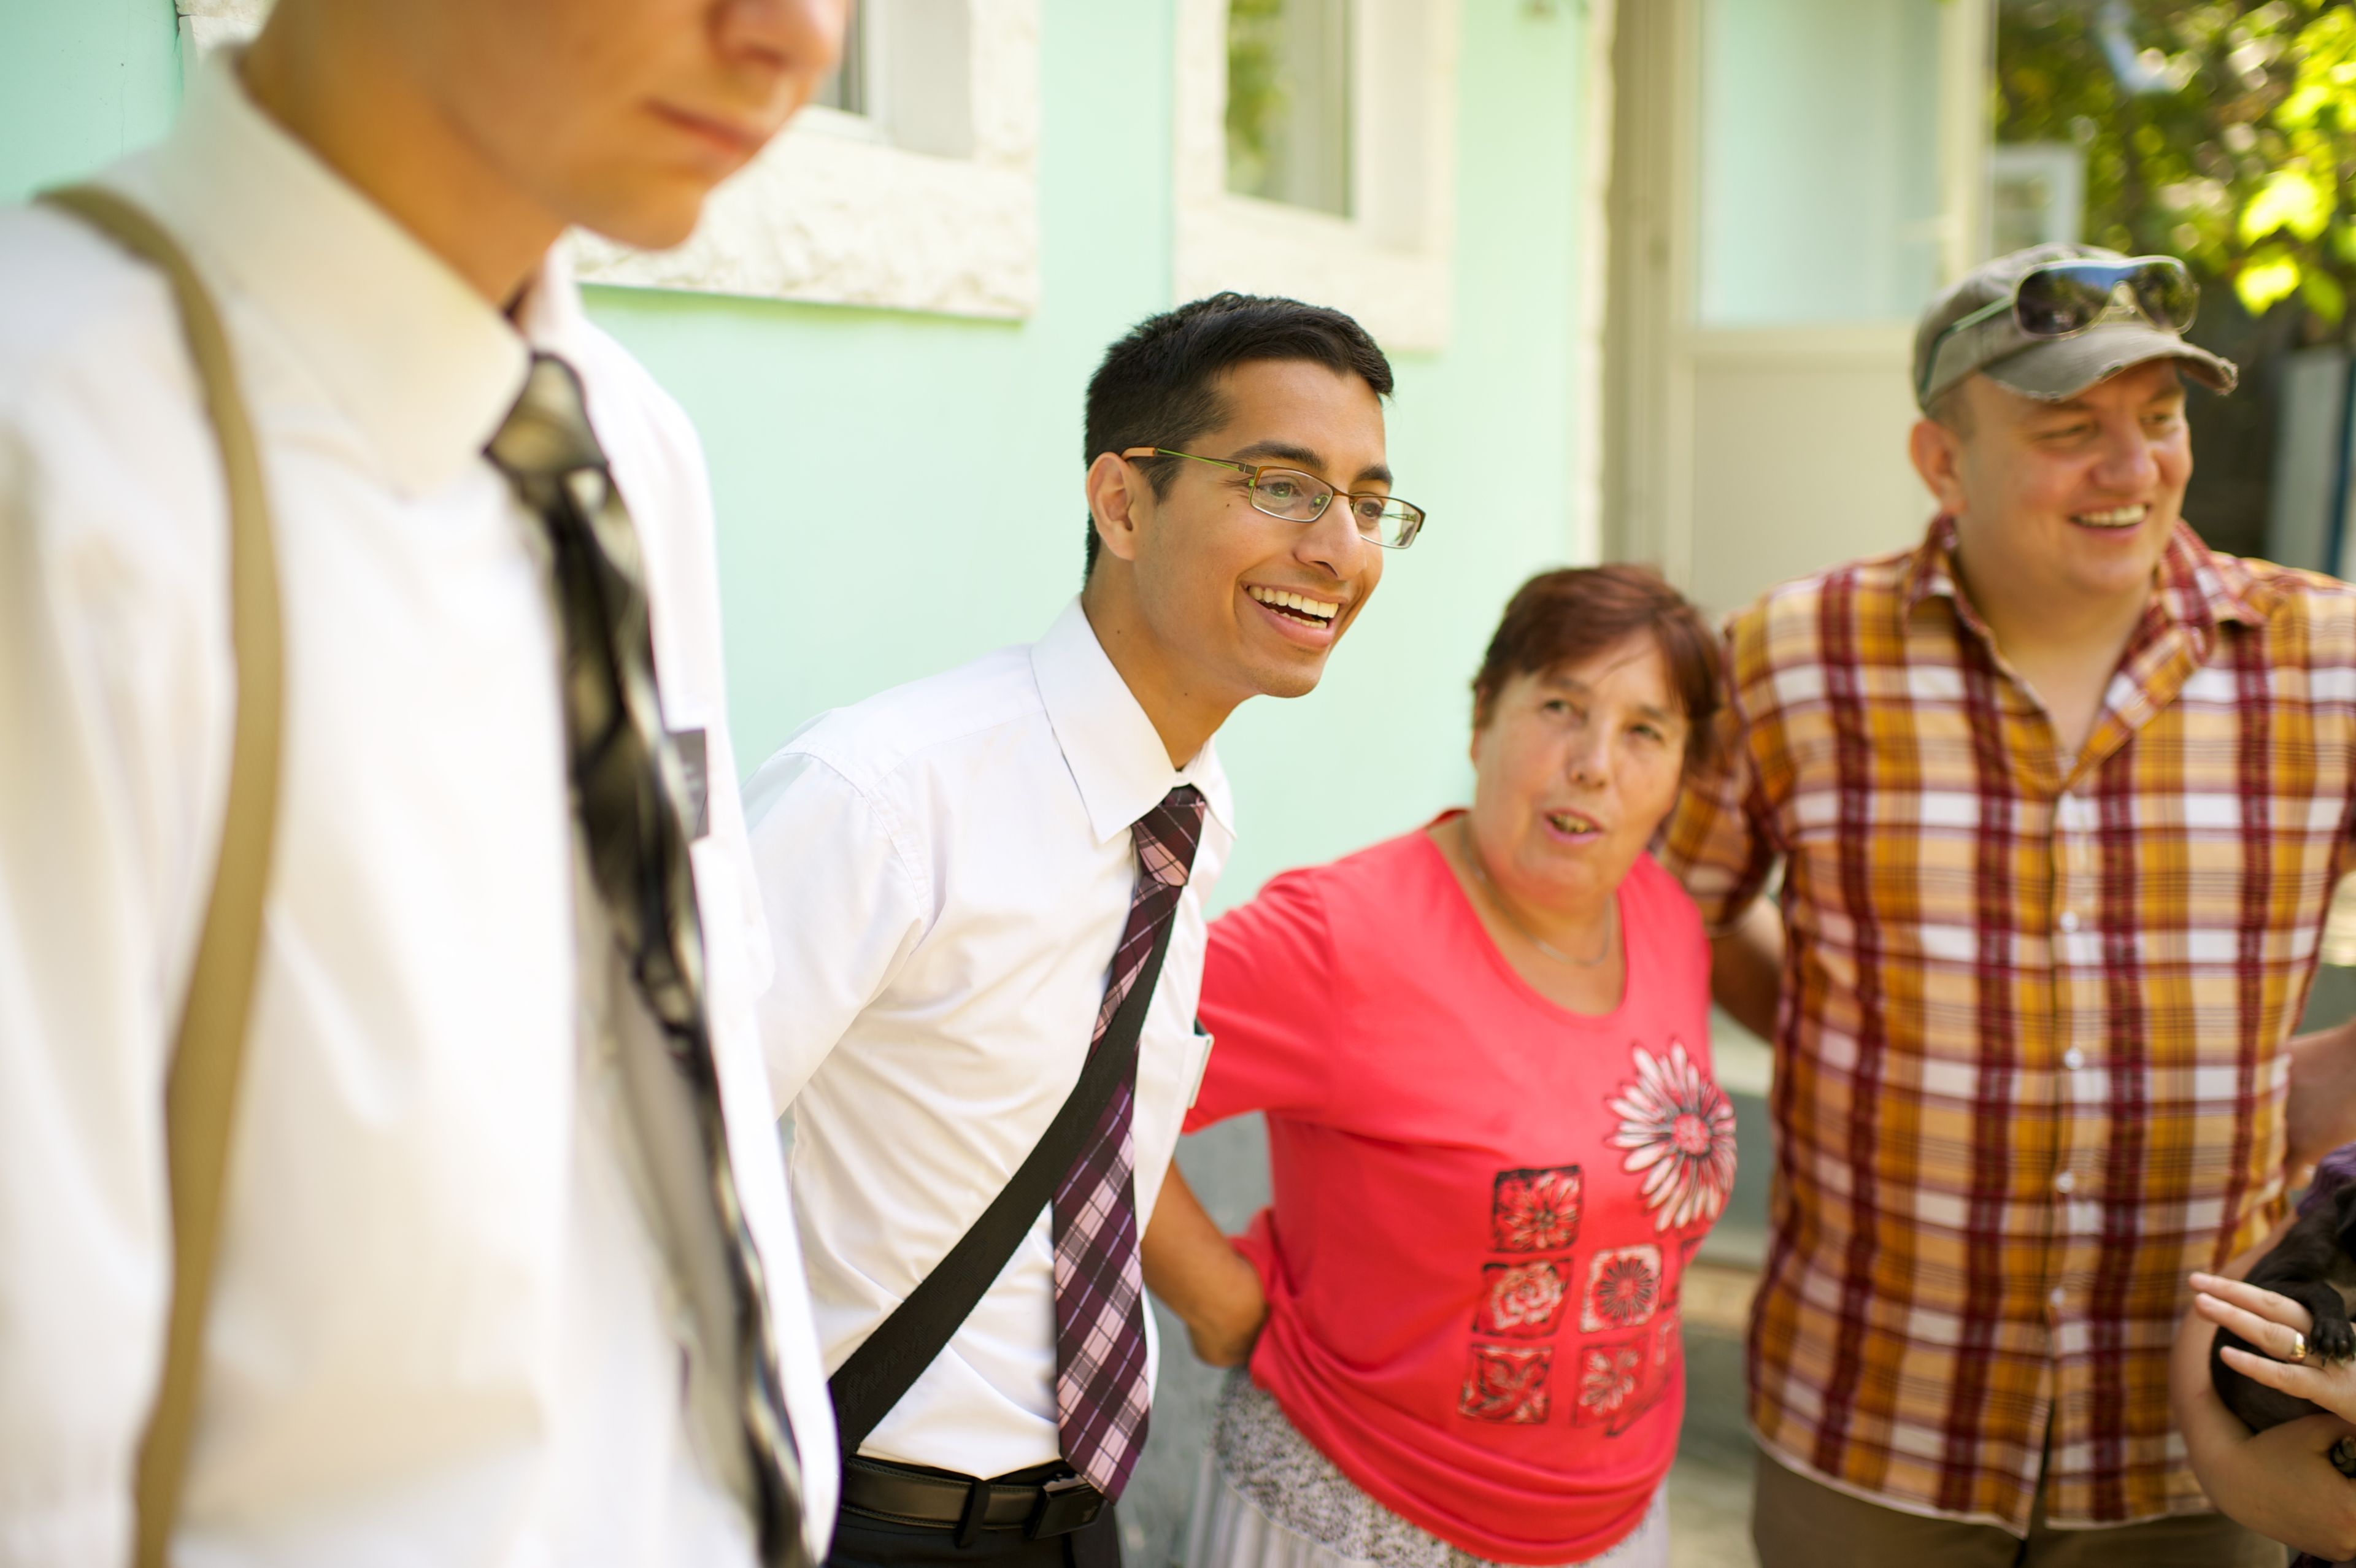 Elder missionaries standing beside a couple outside.